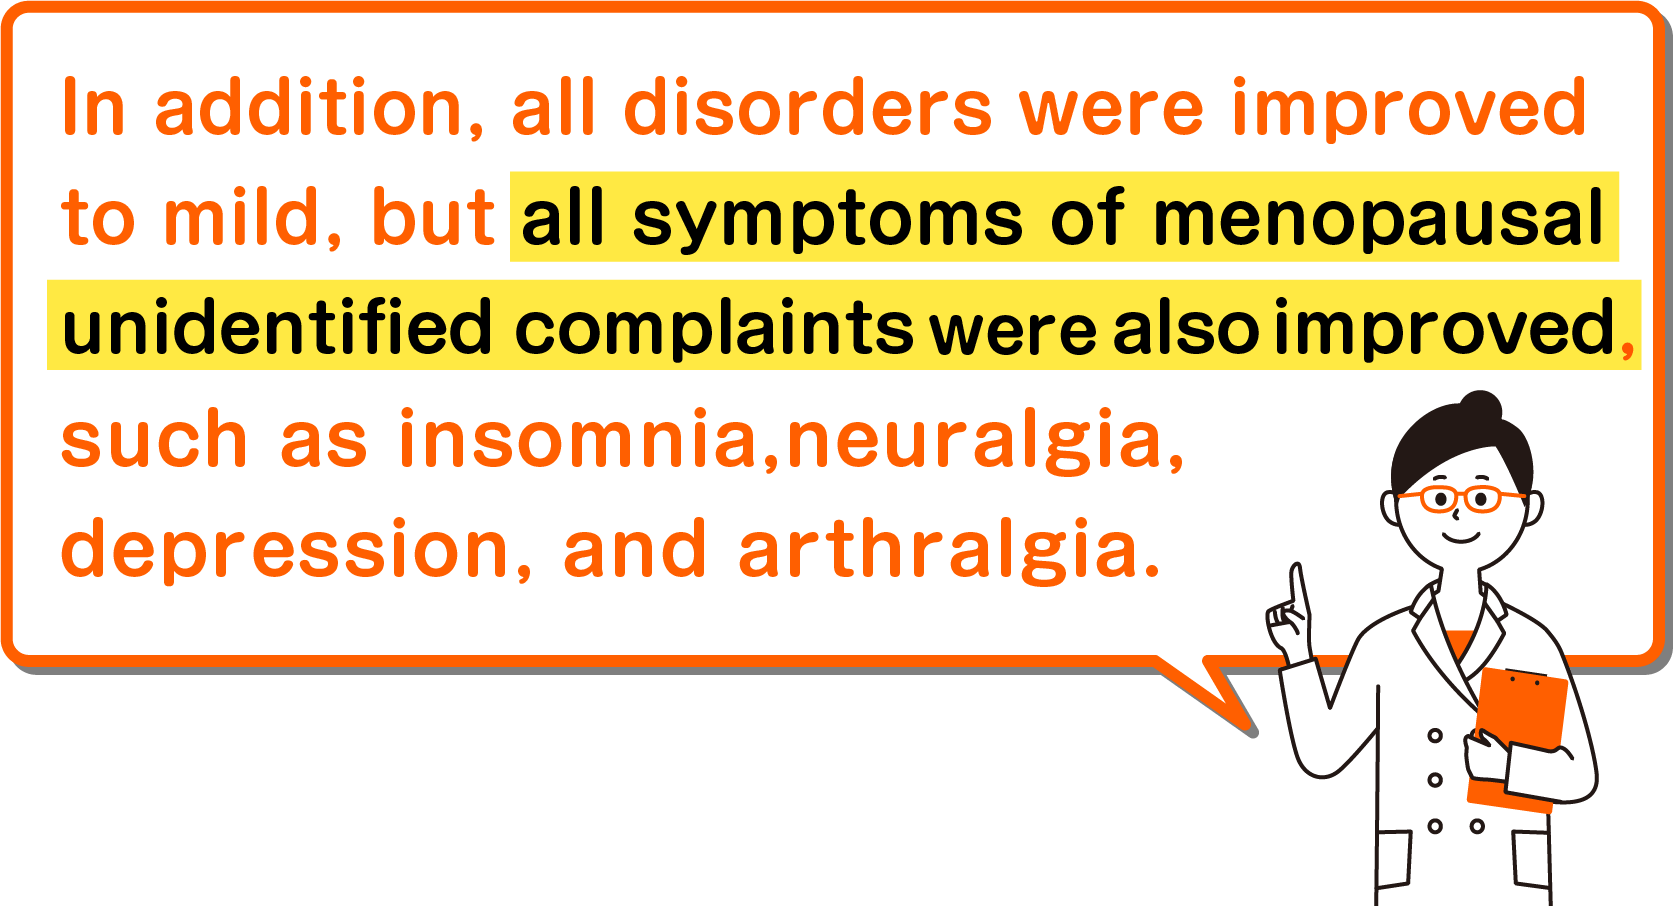 In addition, all disorders were improved to mild, but all symptoms of menopausal unidentified complaints were also improved, such as insomnia, neuralgia, depression, and arthralgia.